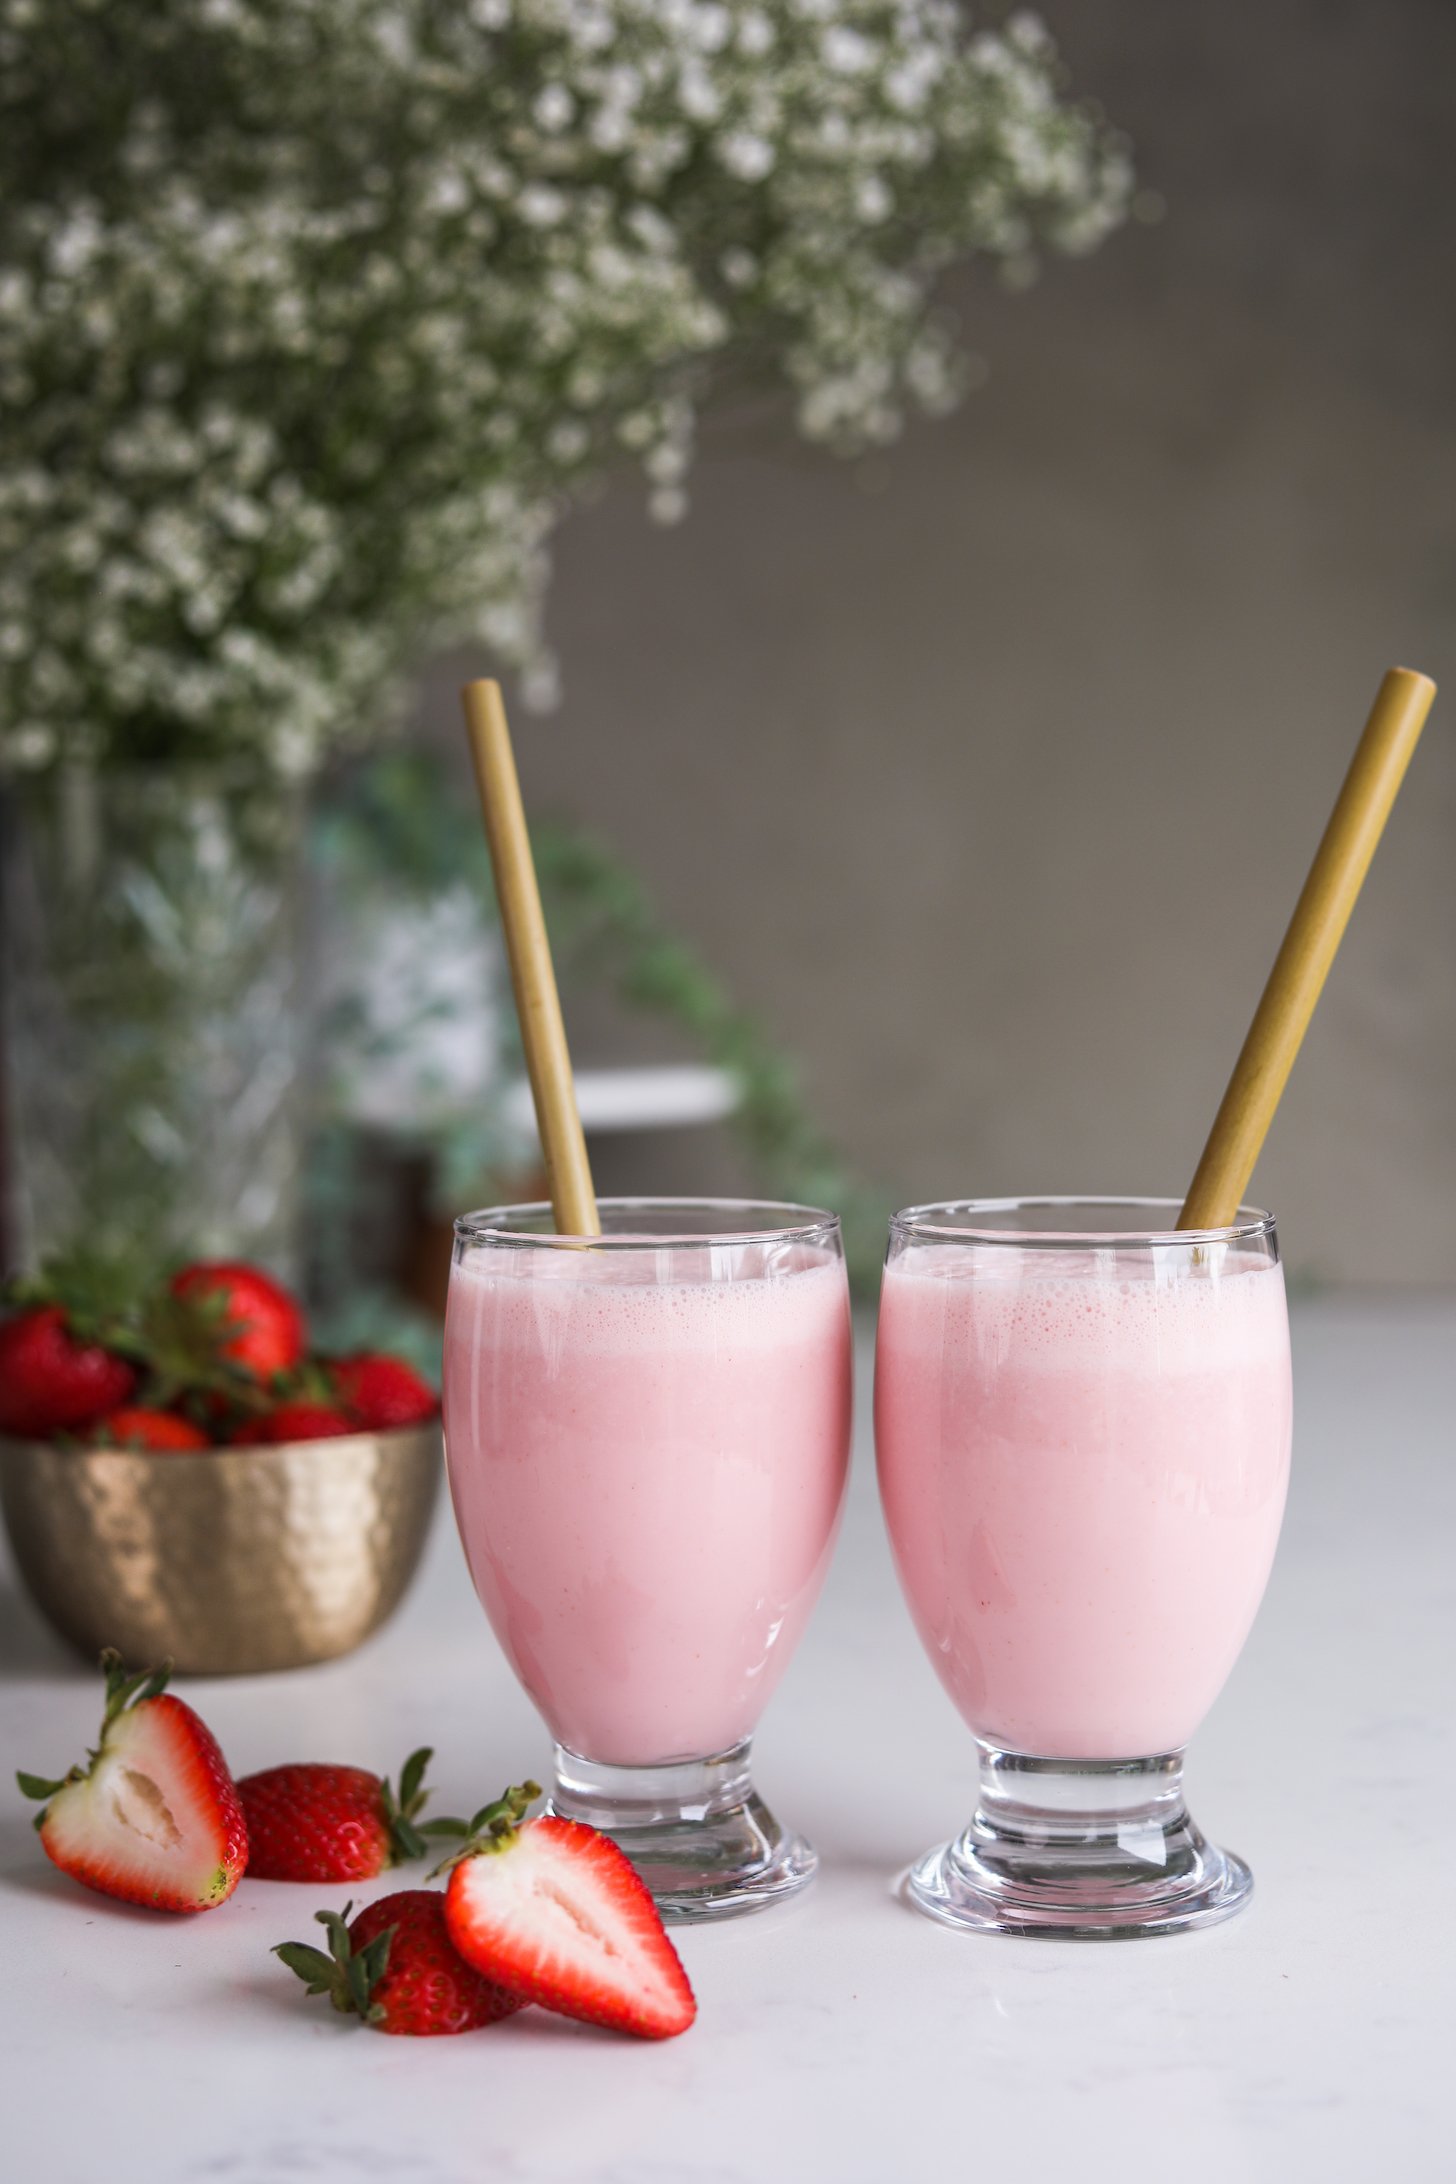 Two glasses of a pink drink - each with a straw with a background of white flowers and fresh strawberries.